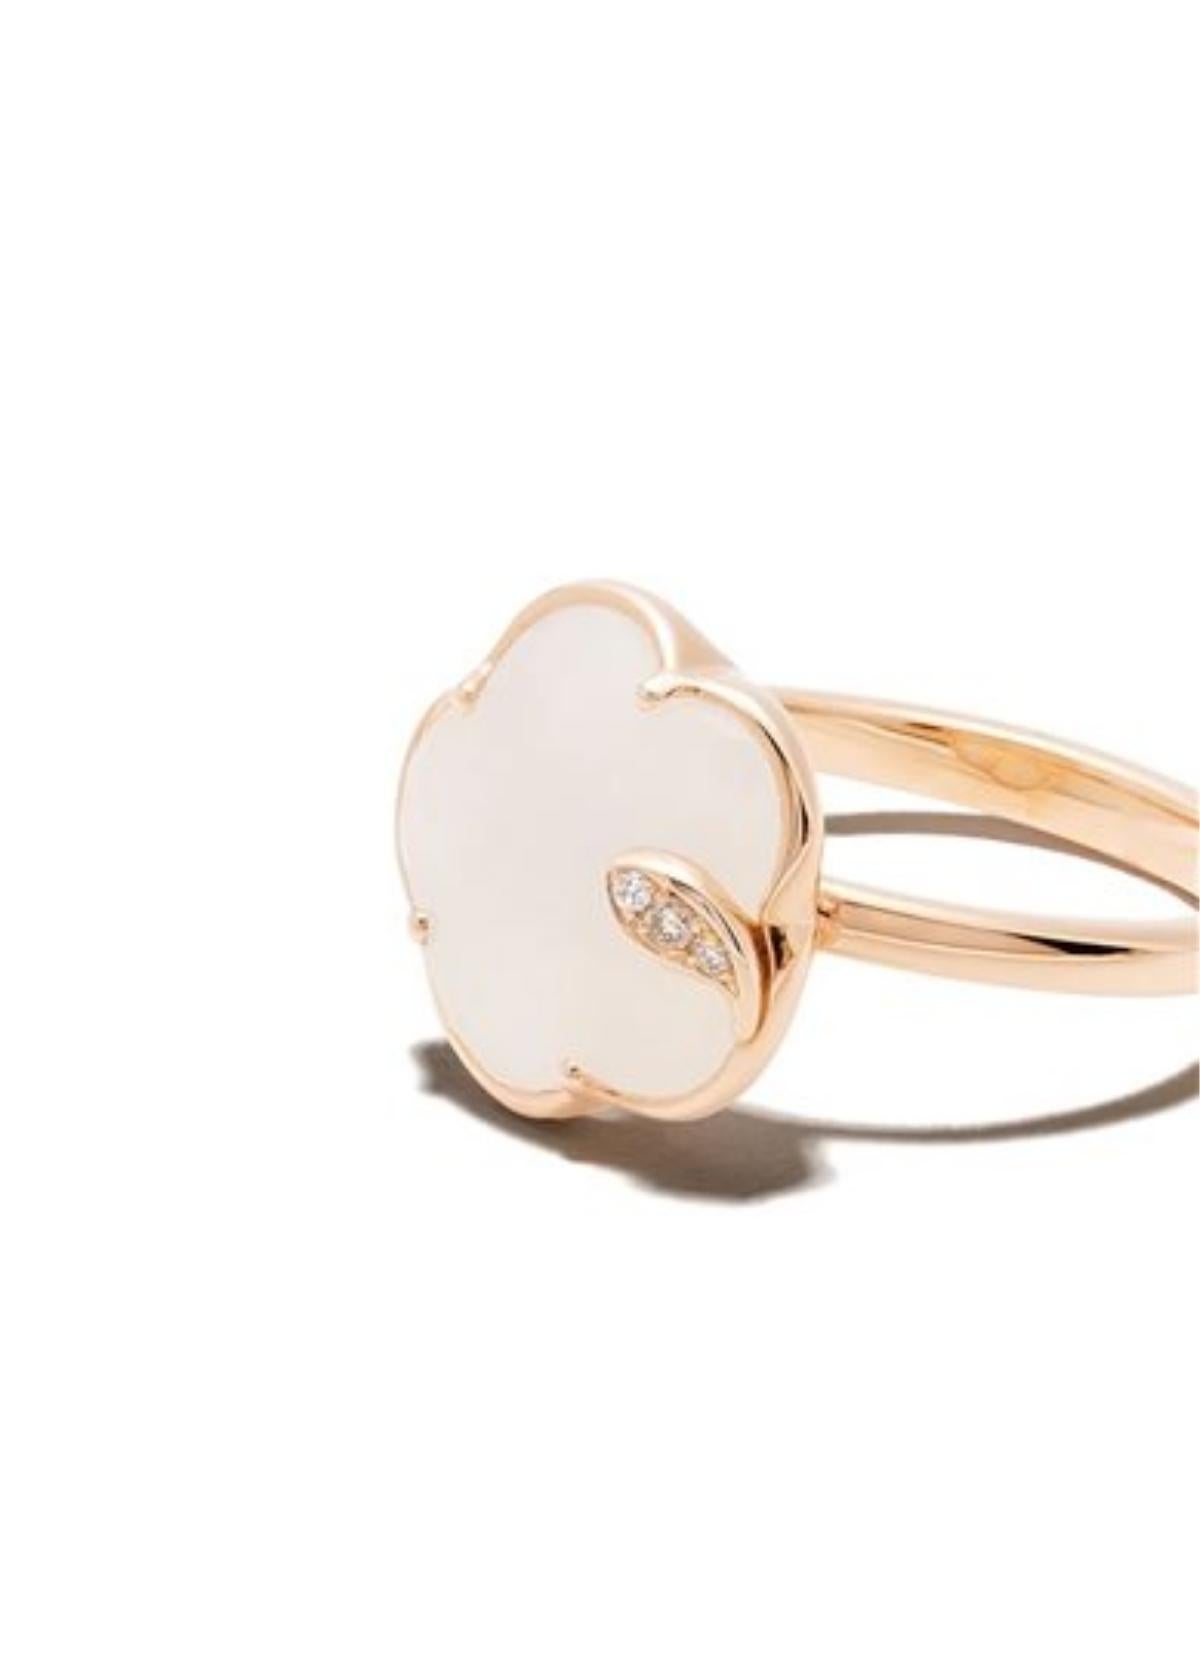 Petit Joli Ring in 18k Rose Gold with White Agate, White and Champagne Diamonds.

Petit Joli is a floral dream on your skin. The collection is designed for women always blooming in a free soul. This collection embodies the everlasting connection